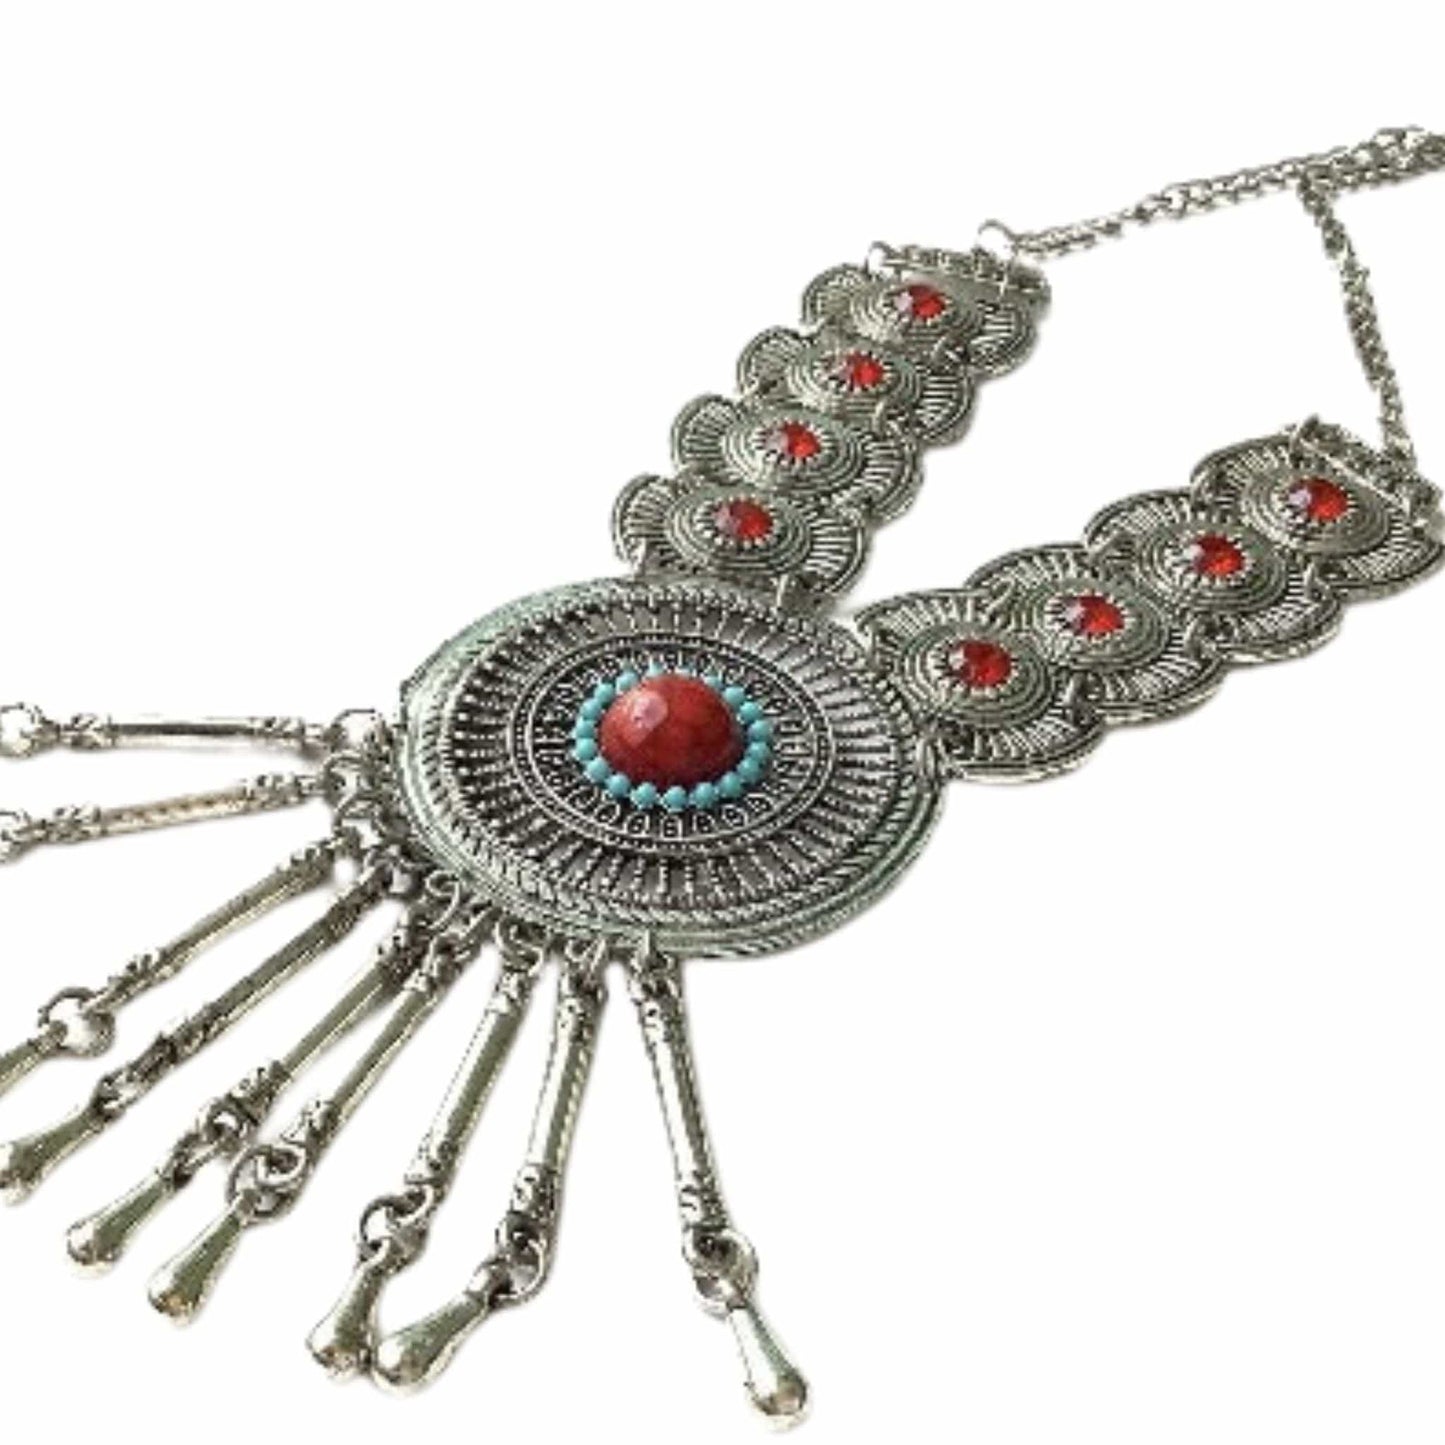 Indian Style Necklace Silver / Metal / Vintage 1990s